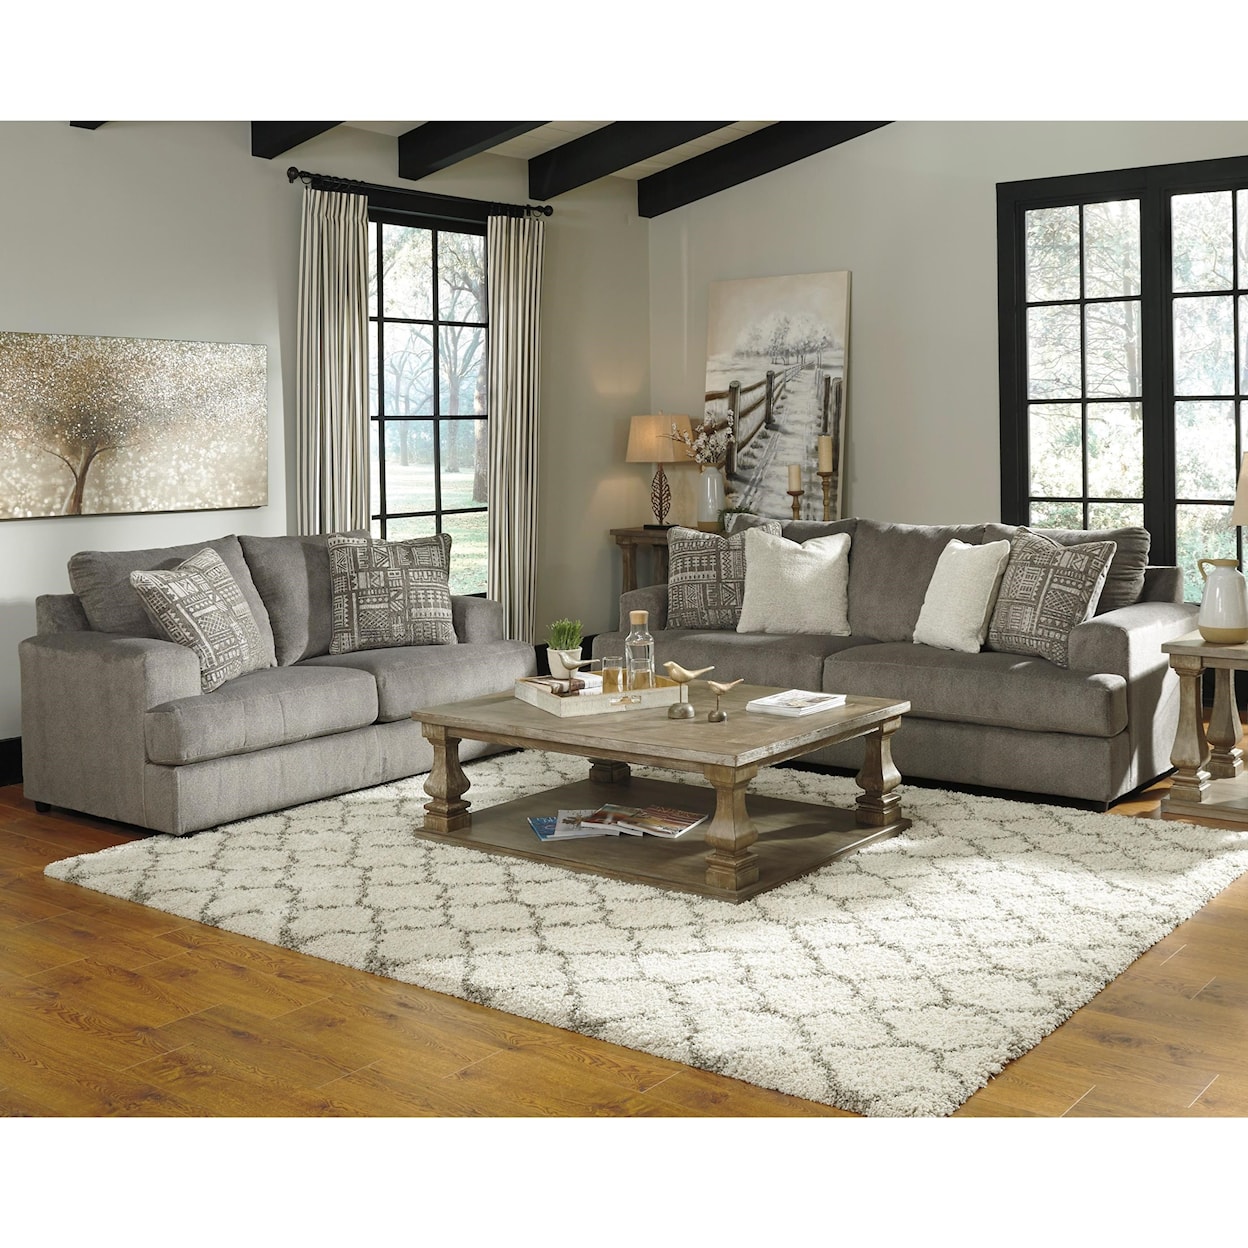 Signature Design by Ashley Soletren Stationary Living Room Group